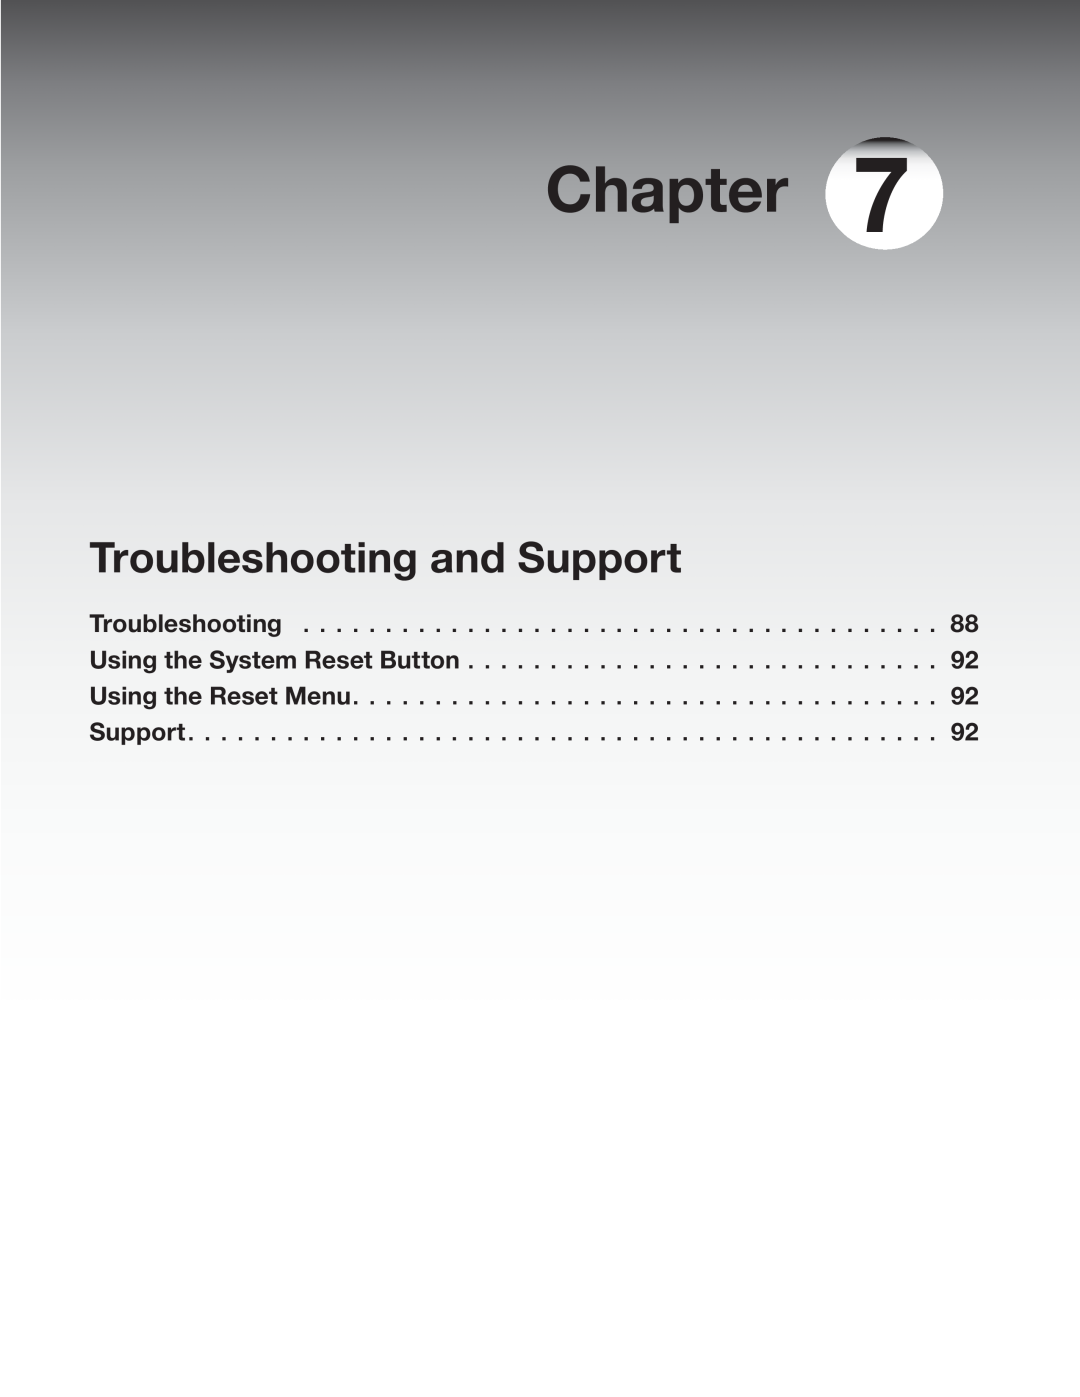 Mitsubishi Electronics LT-3780, LT-3280 manual Troubleshooting and Support, Chapter 